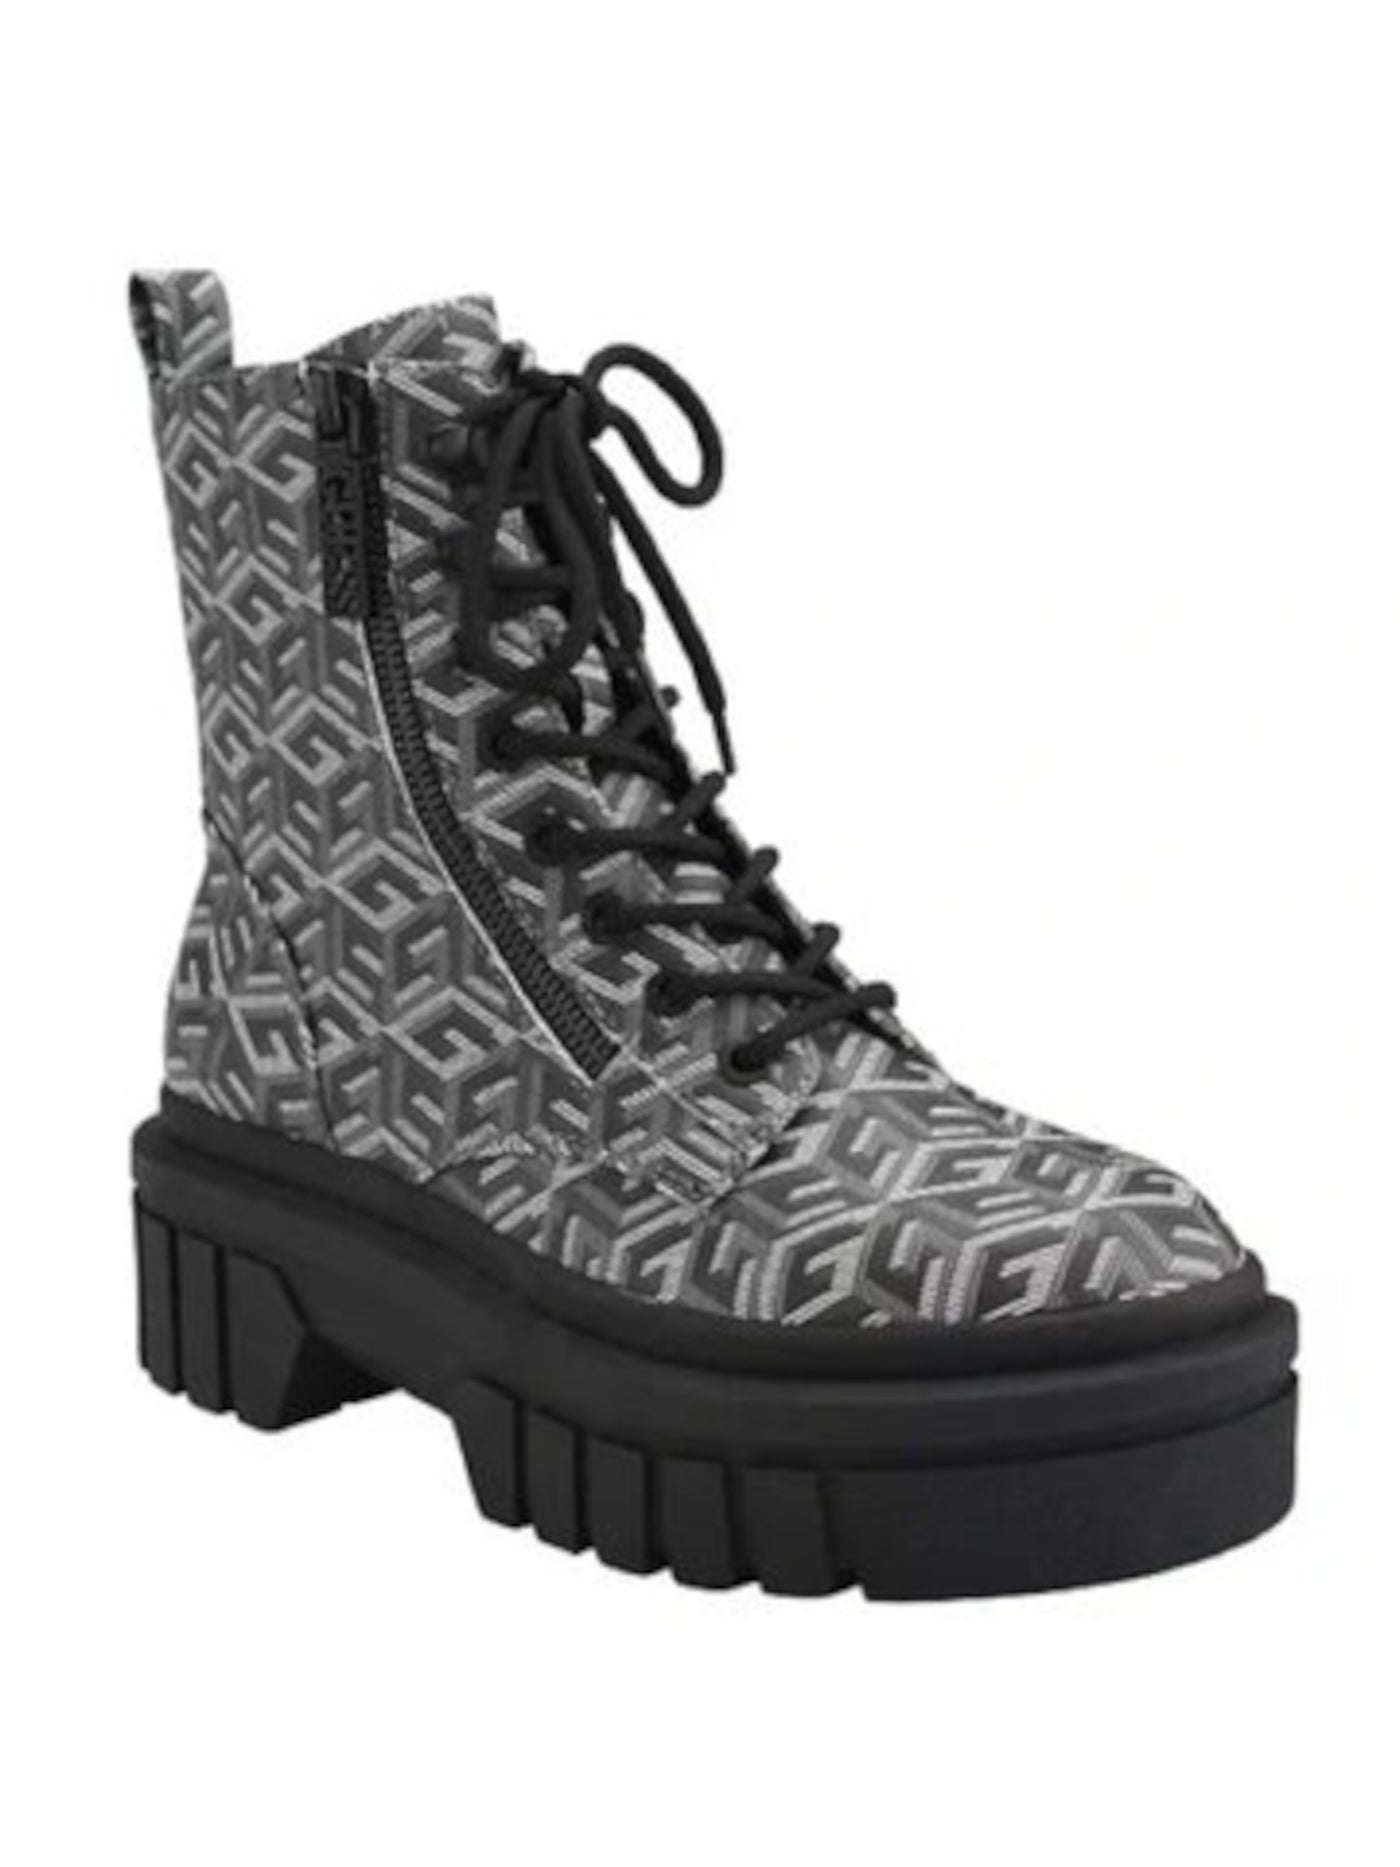 GUESS Womens Black Printed Zipper Lug Sole Ferina Round Toe Lace-Up Combat Boots 7.5 M